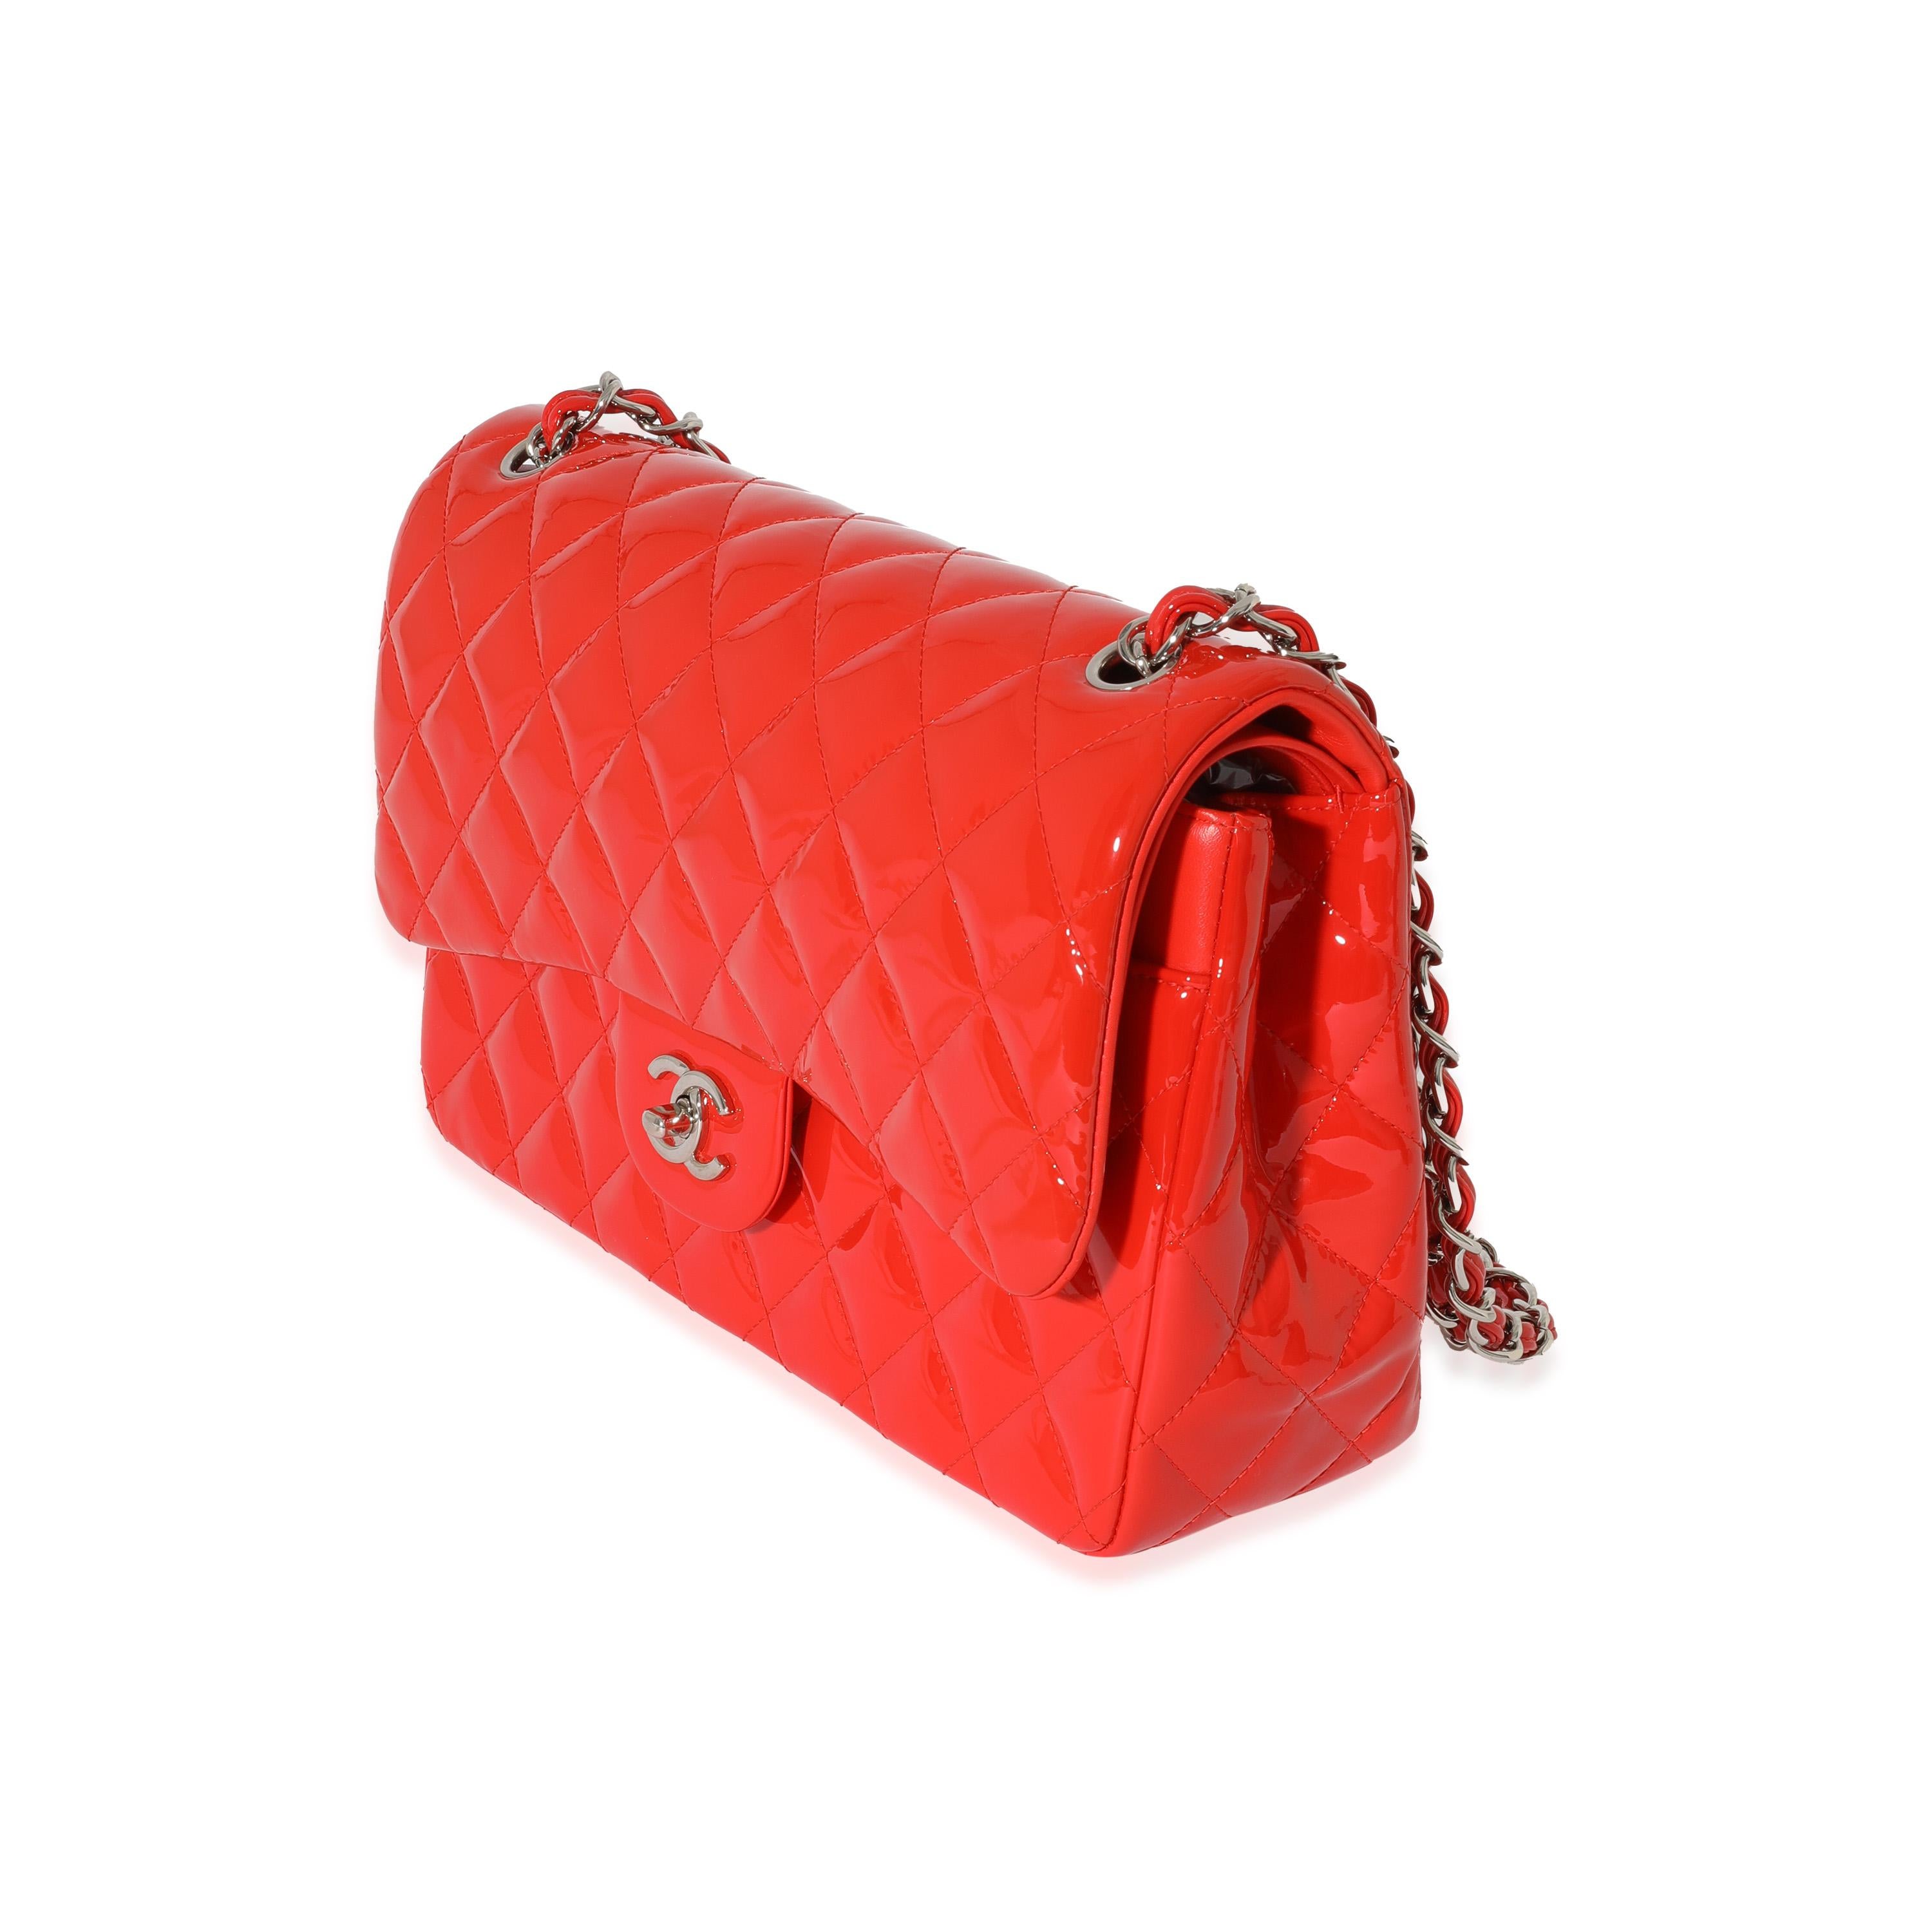 Chanel Orange Quilted Patent Leather Jumbo Double Flap Bag In Excellent Condition For Sale In New York, NY